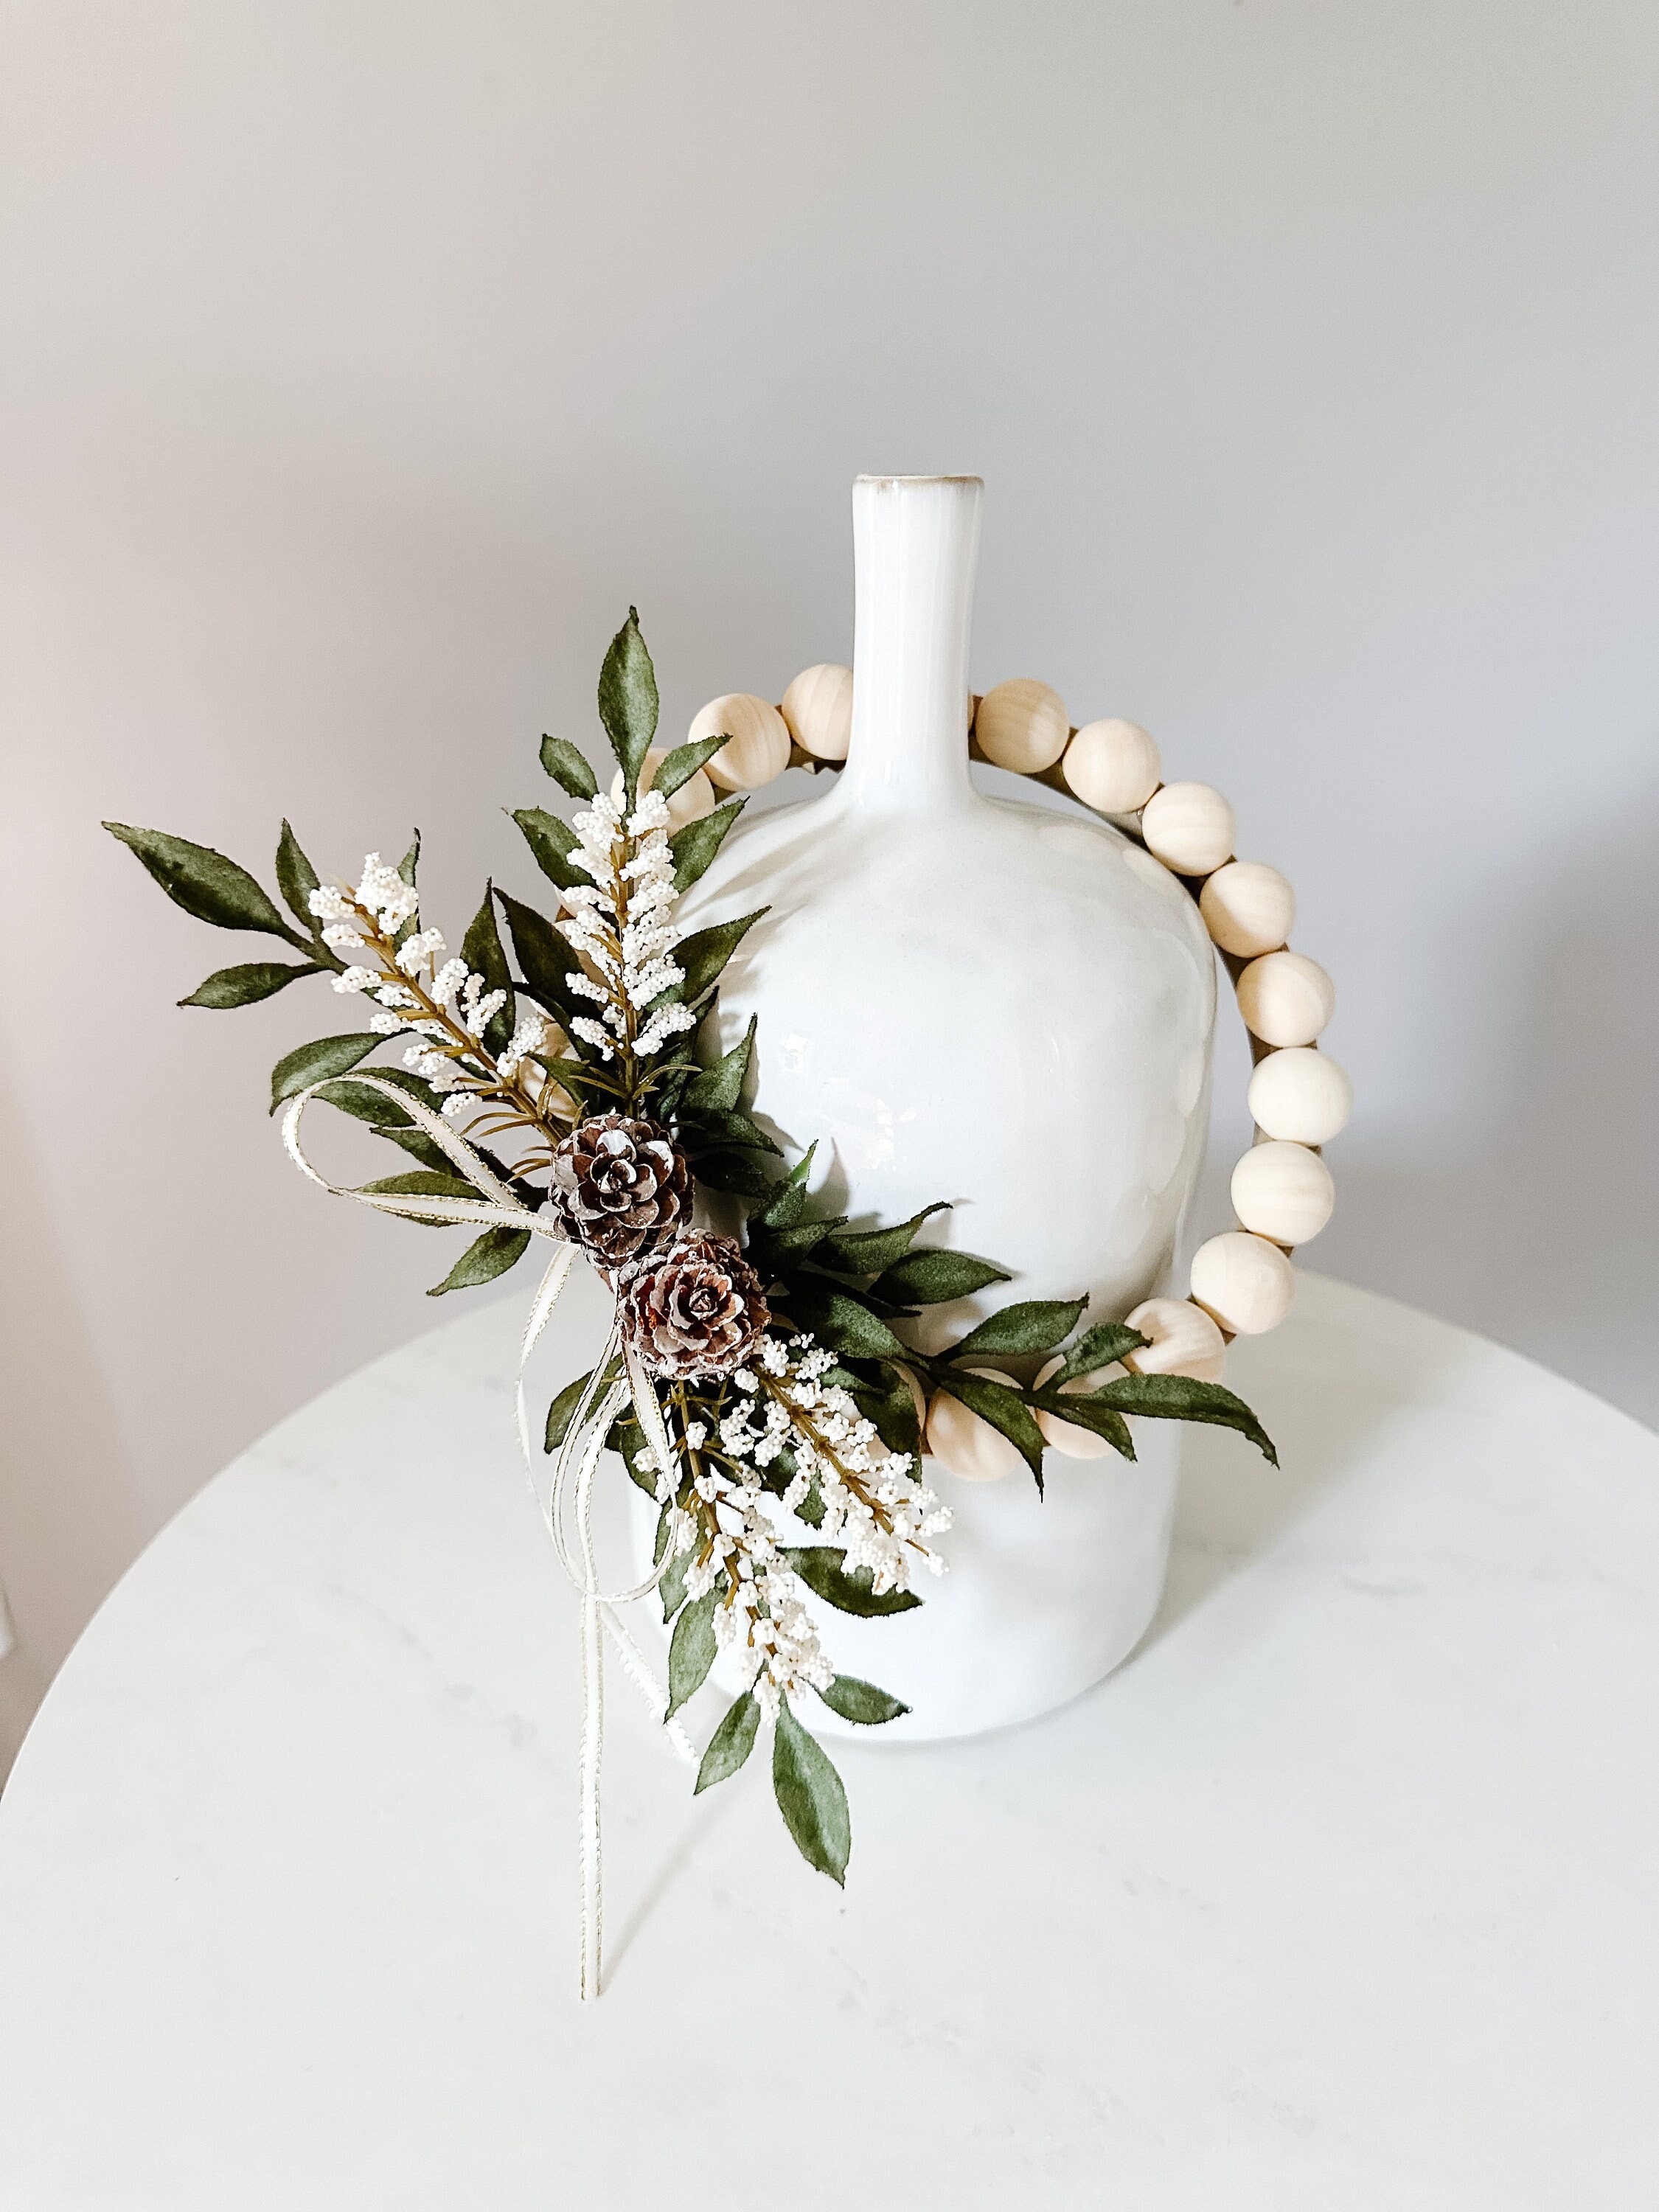 Candle Ring / Mini Wreath Lemon Beauty 3.5 Inner / 9.5 Outer Diameters Twig  Base Spring, Summer, Farmhouse WIC-F95274SG 